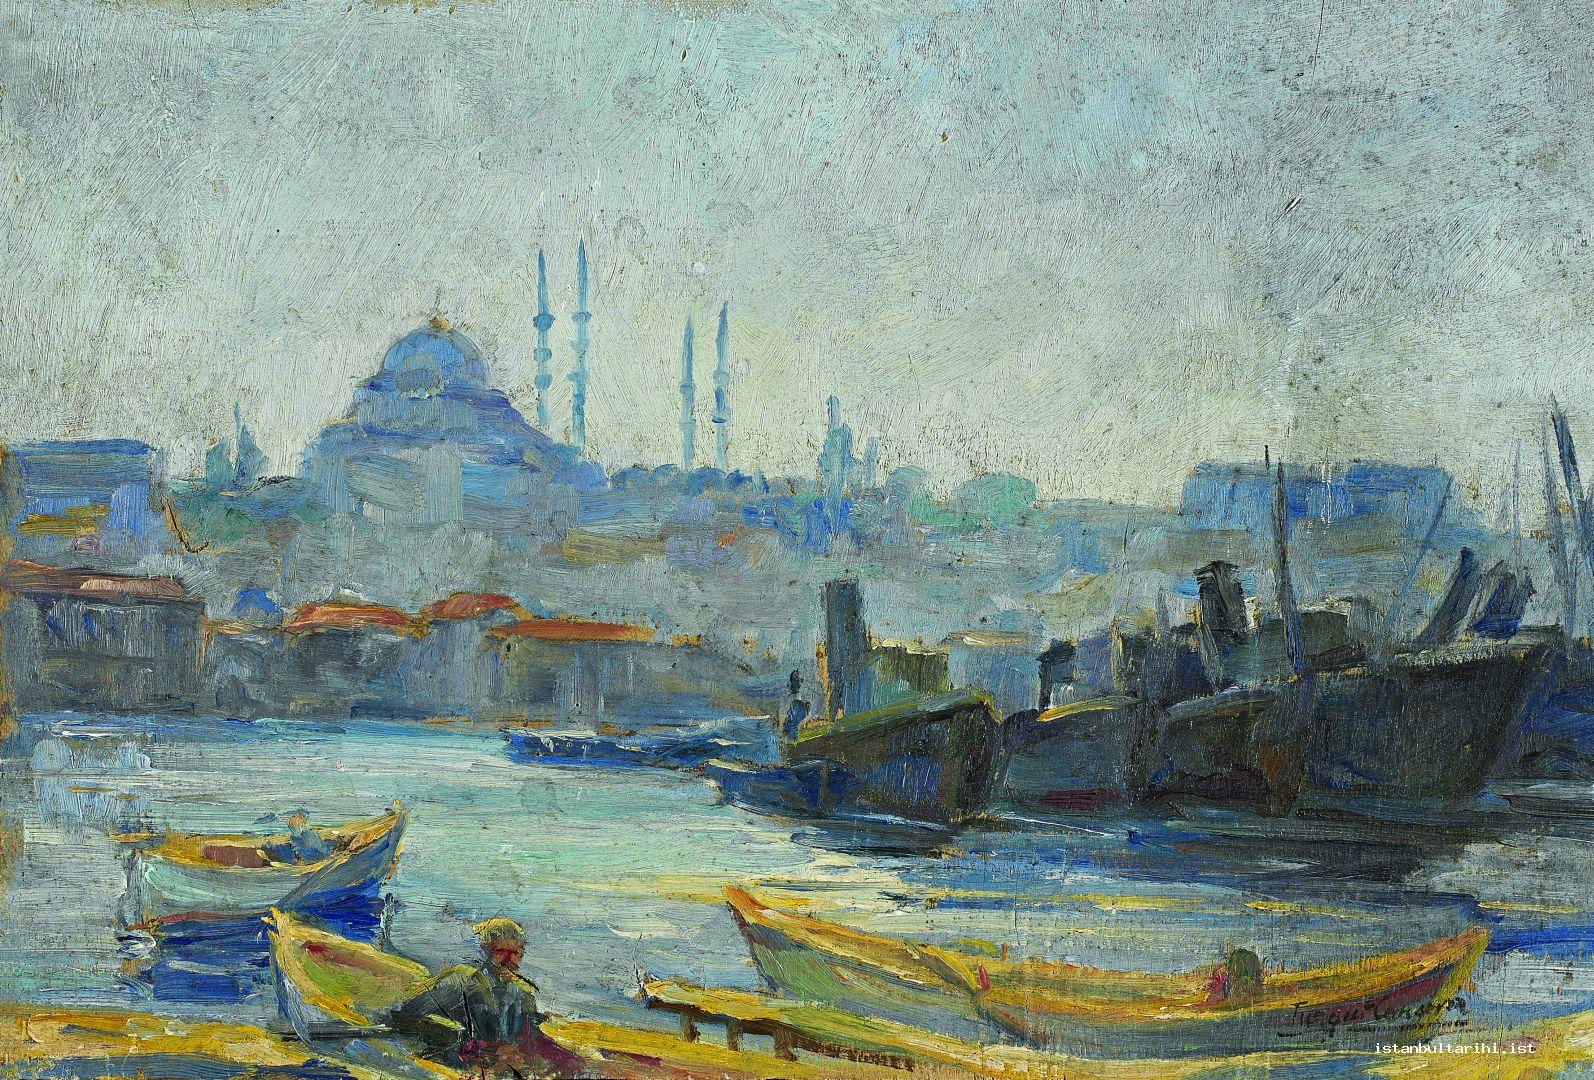 5- Oil painting Istanbul by Turgut Cansever